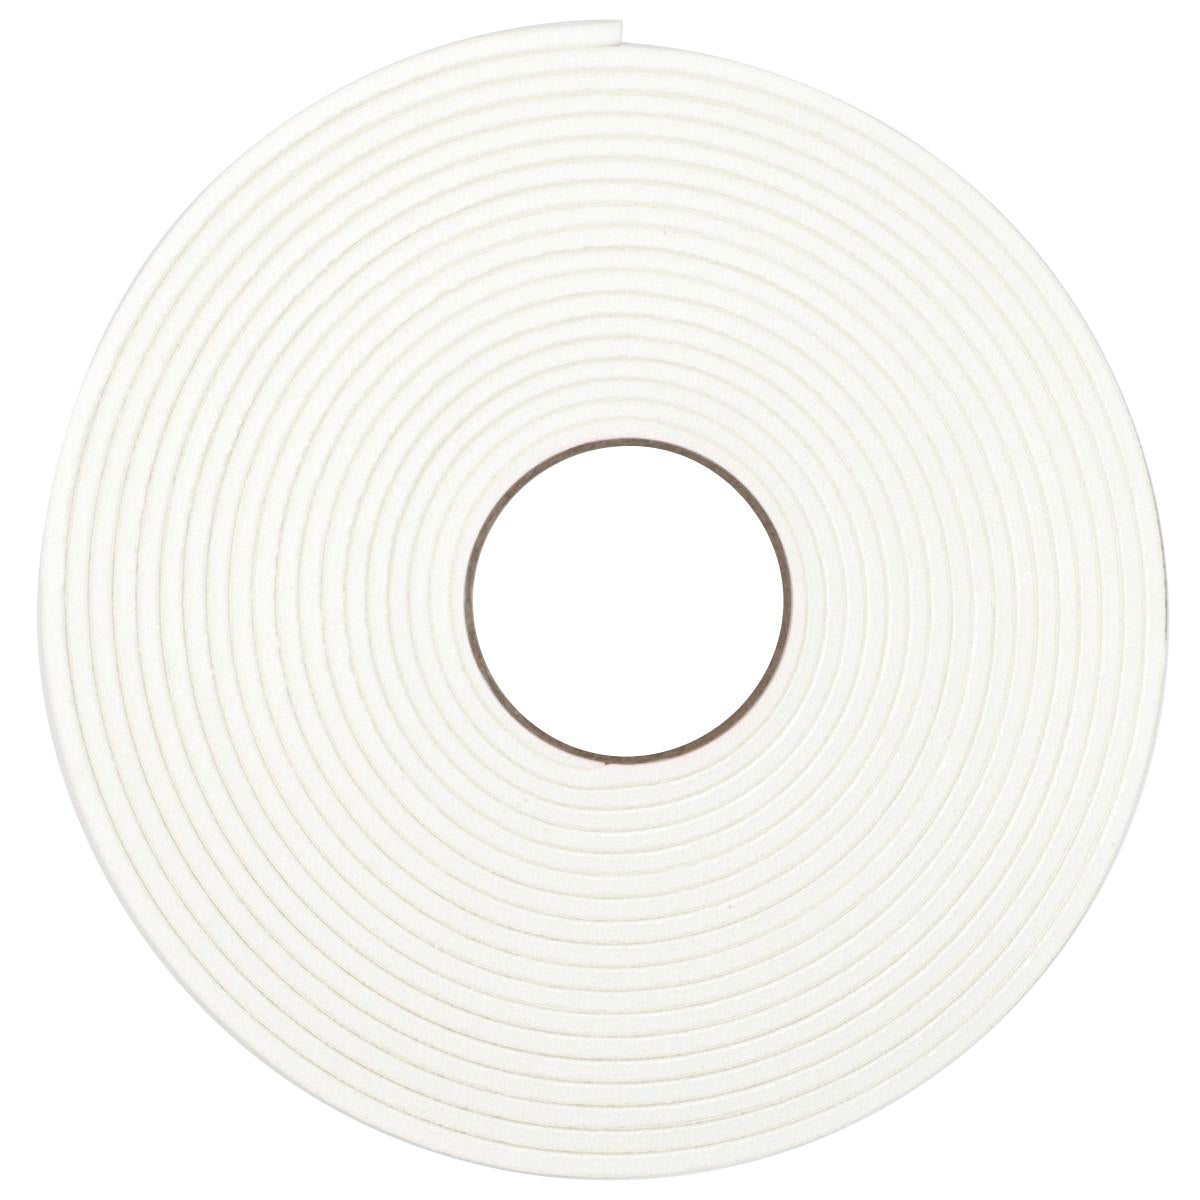 a white adhesive tape on a white background.